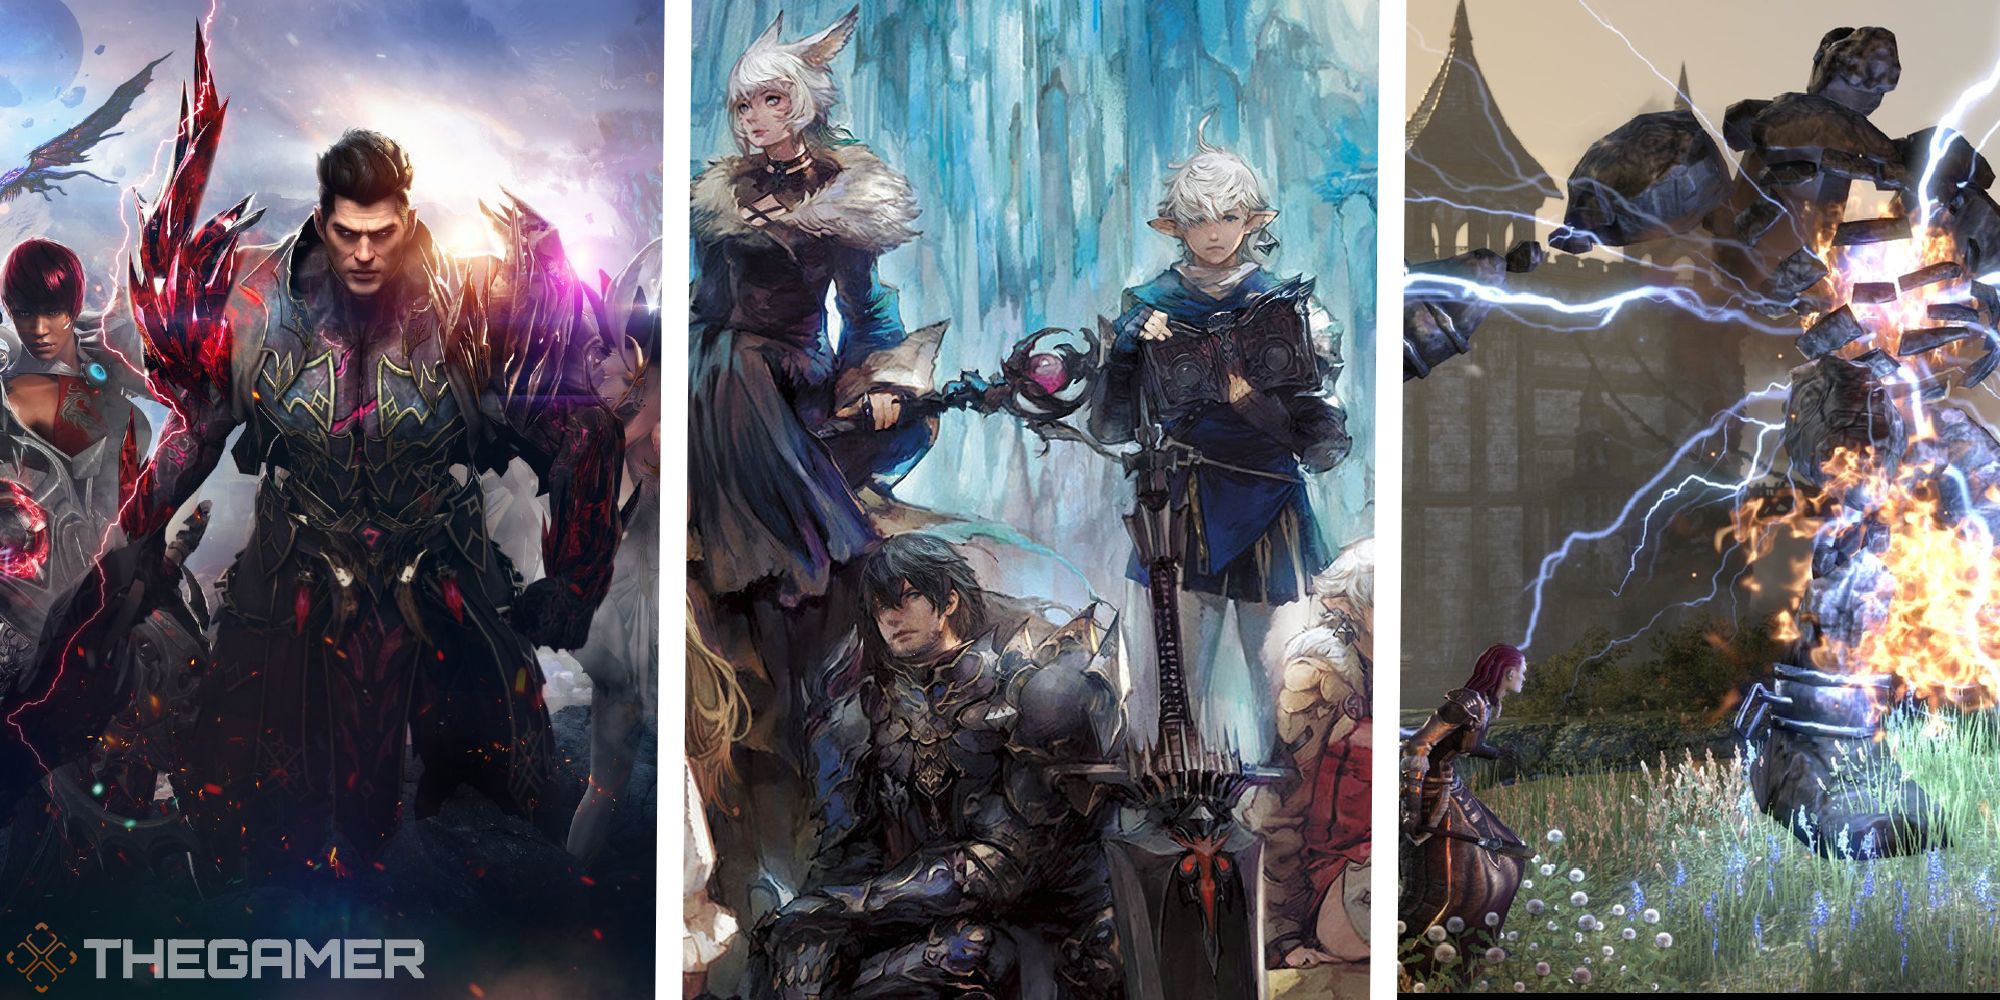 images from lost ark, ffxiv, and elder scrolls online attached side by side